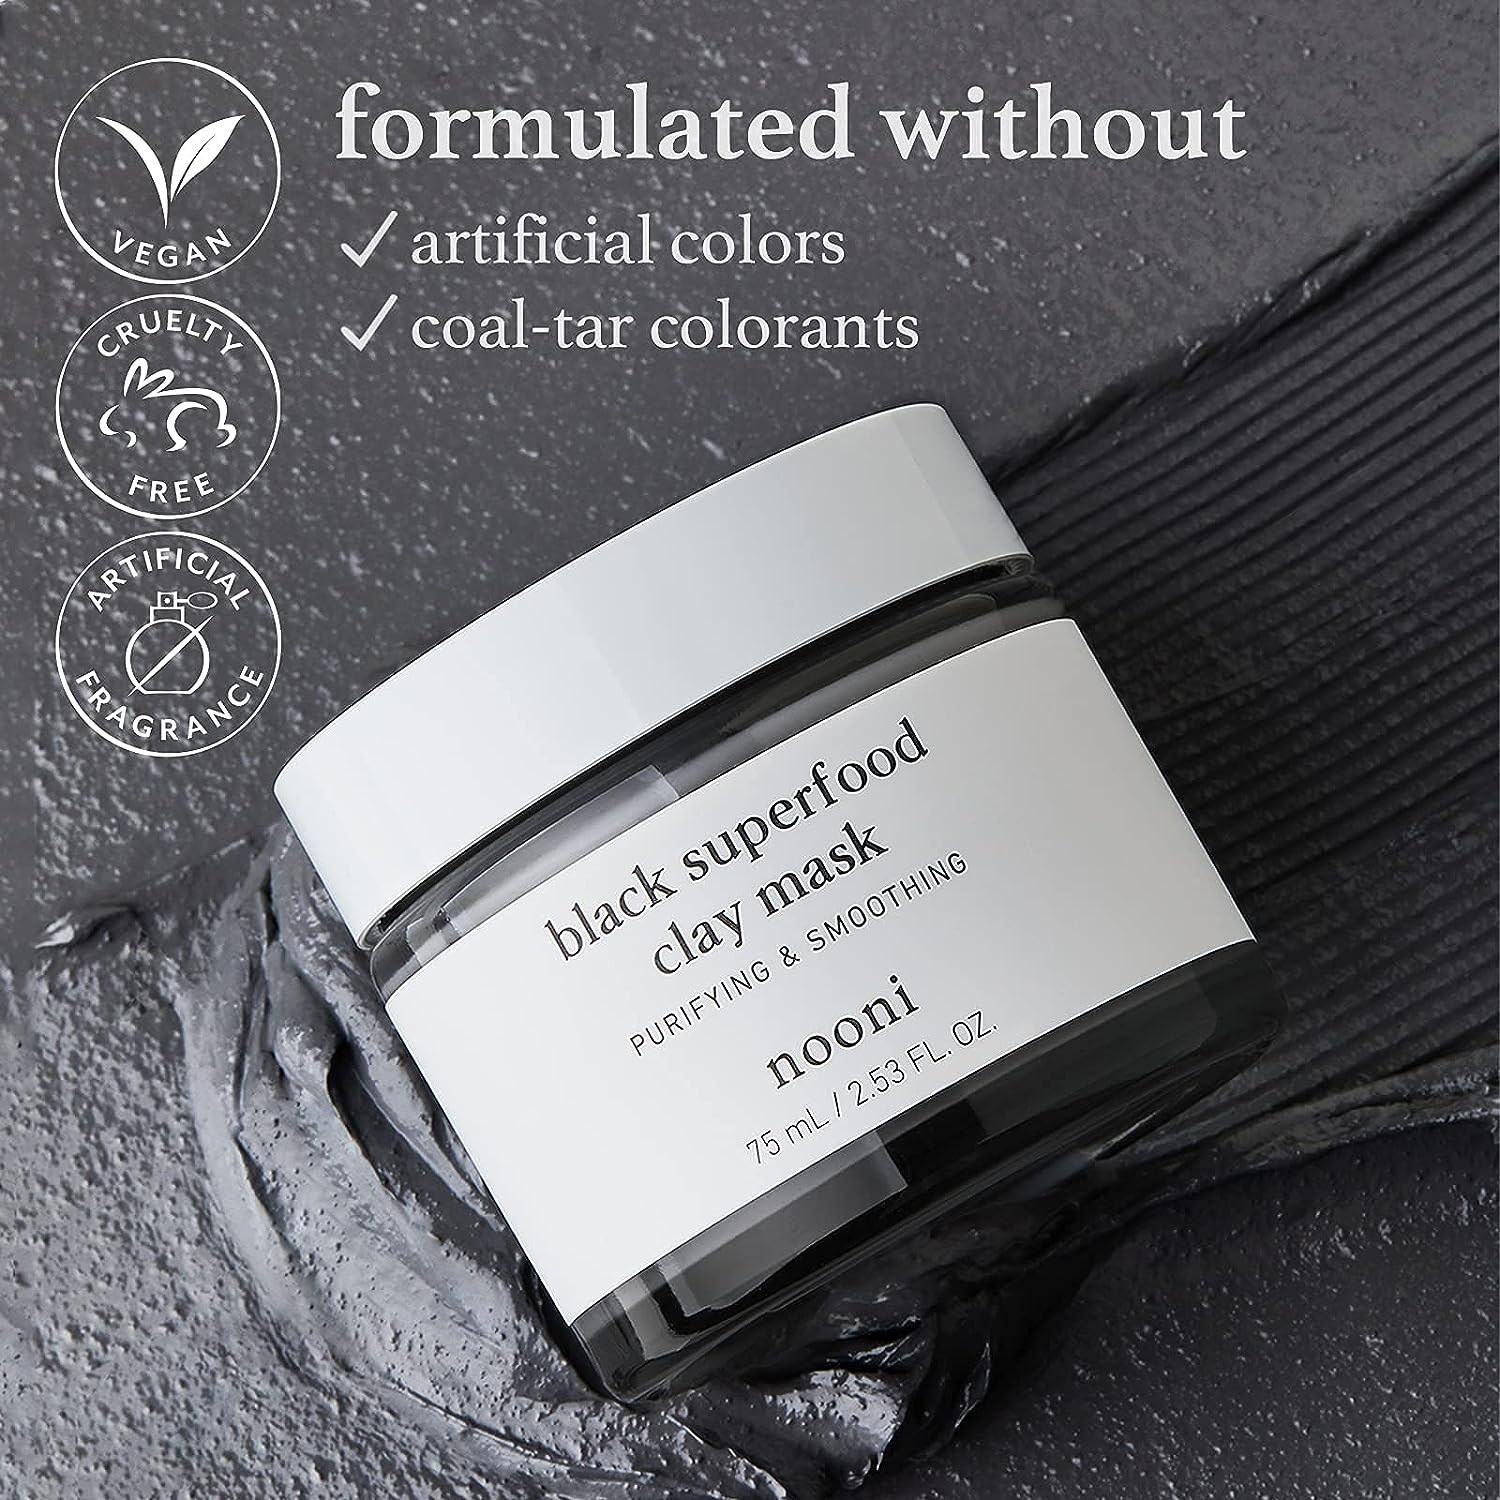 black superfood clay mask